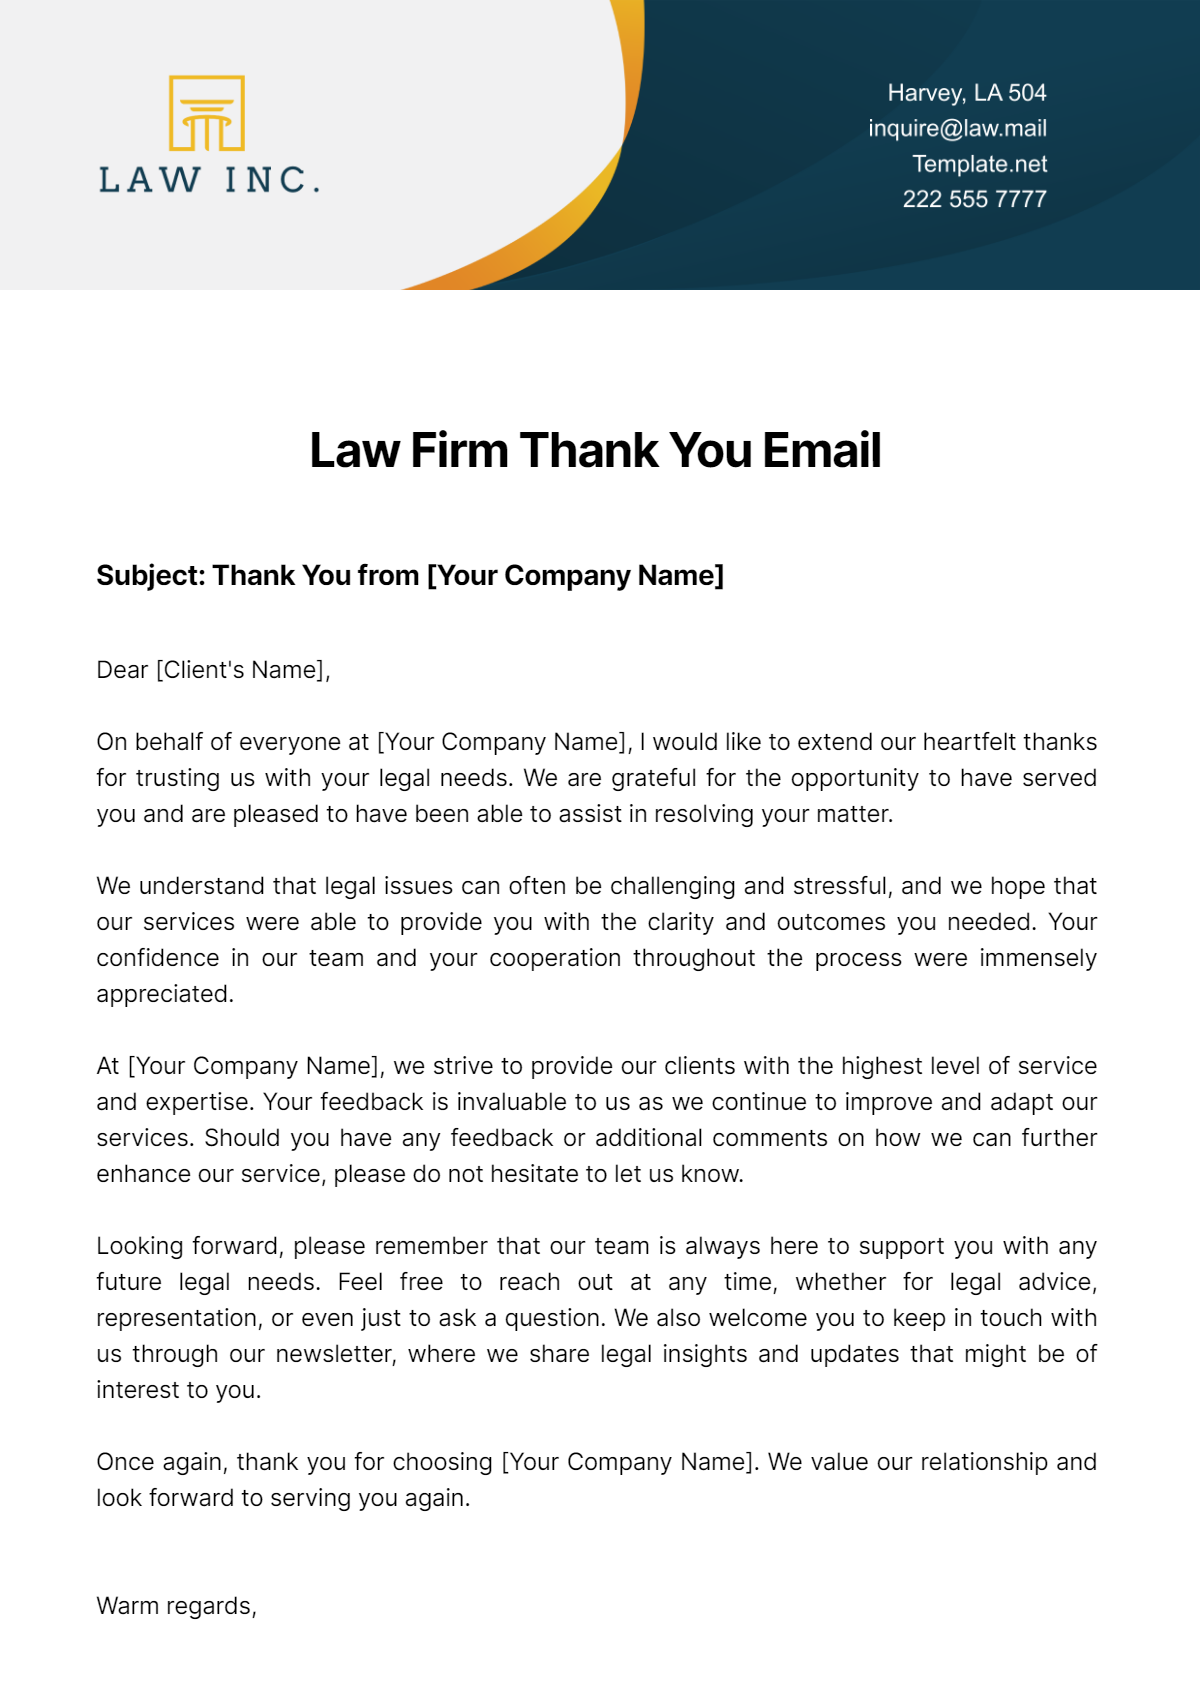 Law Firm Thank You Email Template